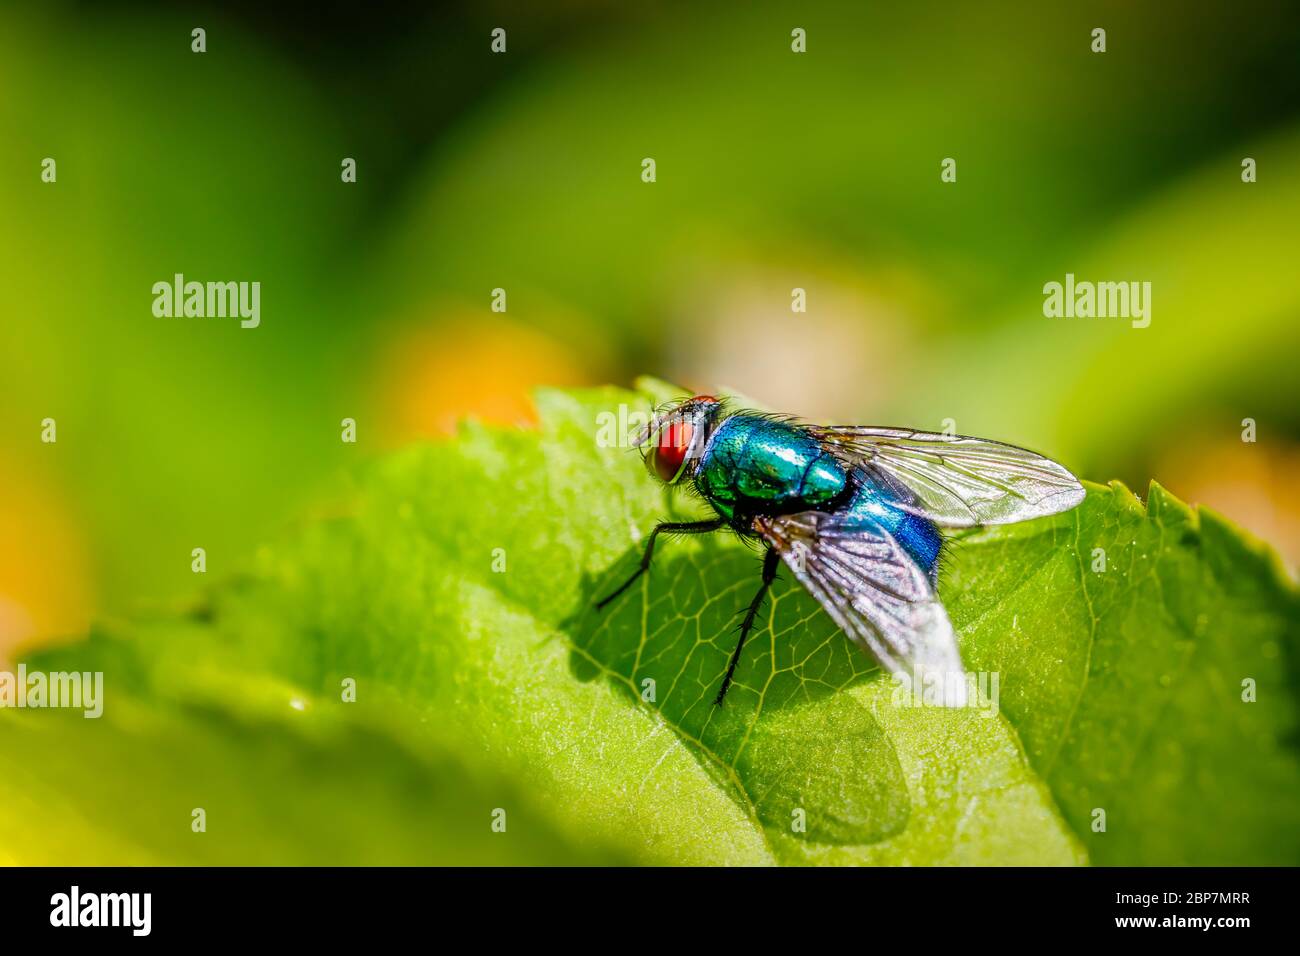 A common green bottle fly (Lucilia sericata), or carrion fly, bluebottle, greenbottle, or cluster fly on a leaf in spring in a garden in Surrey, UK Stock Photo